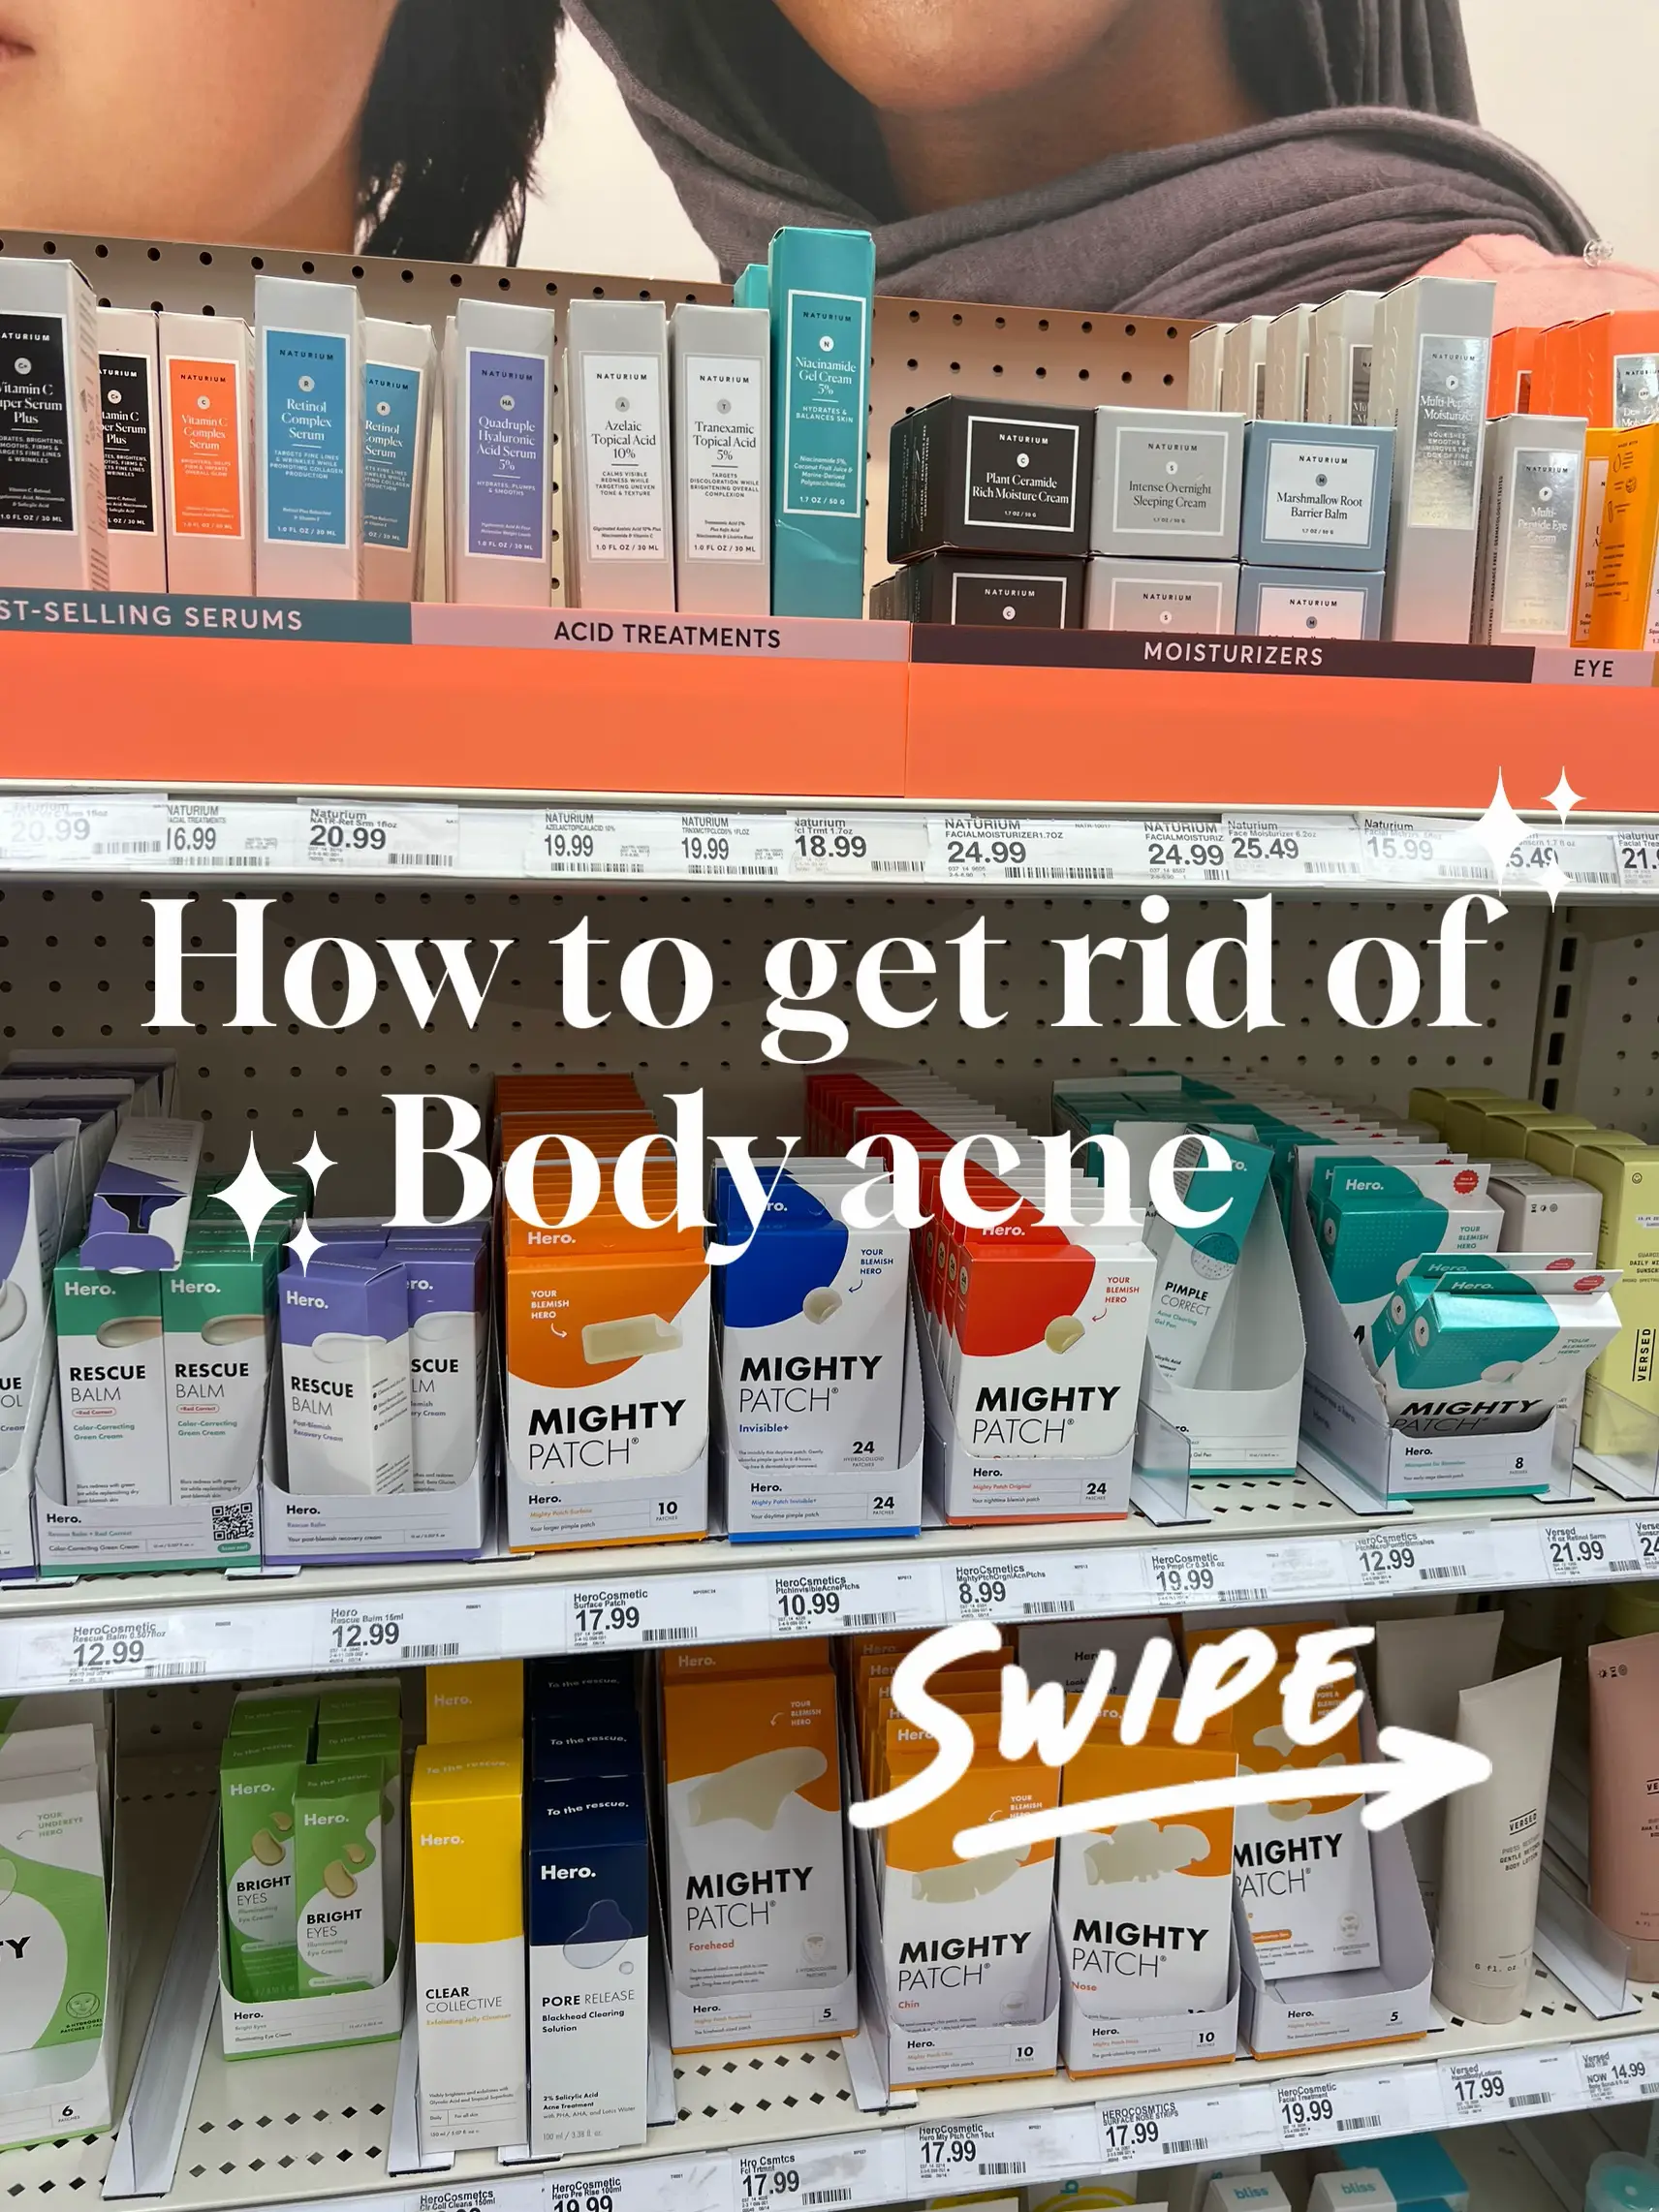 How to get rid of body acne's images